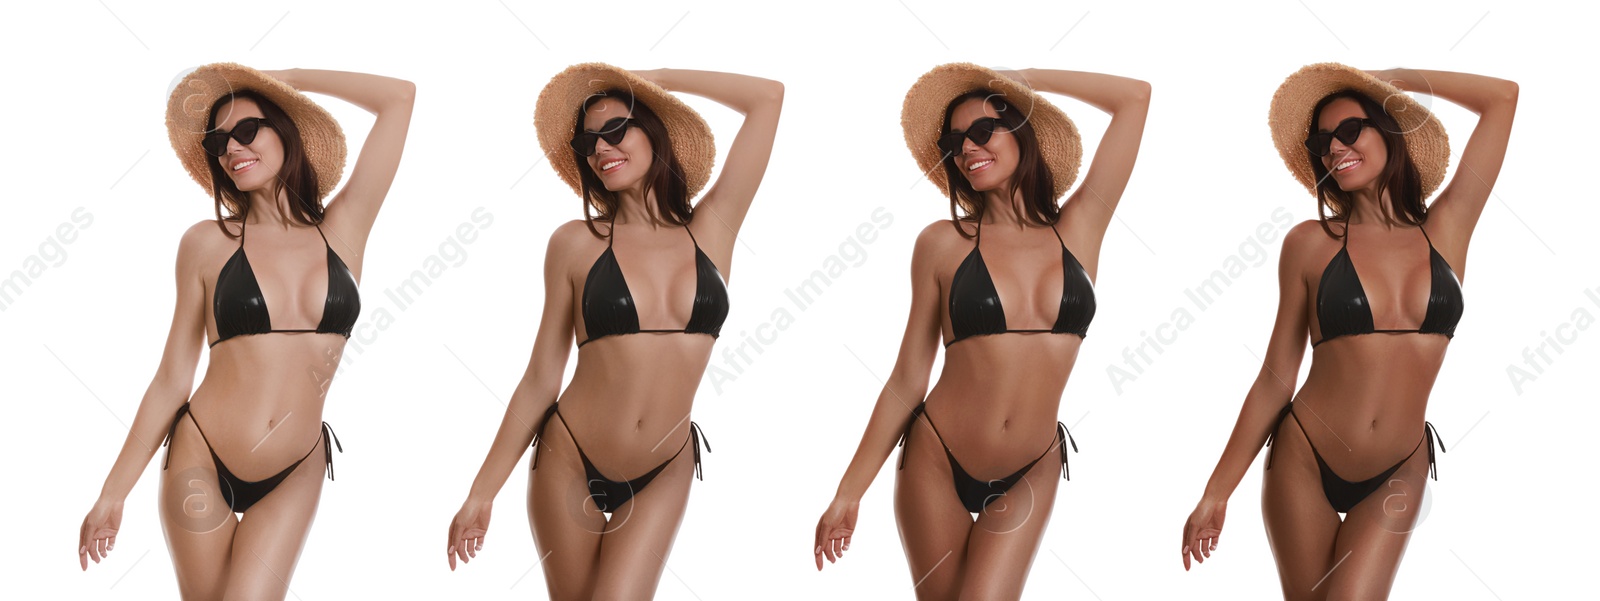 Image of Woman with beautiful body on white background. Banner collage showing stages of suntanning